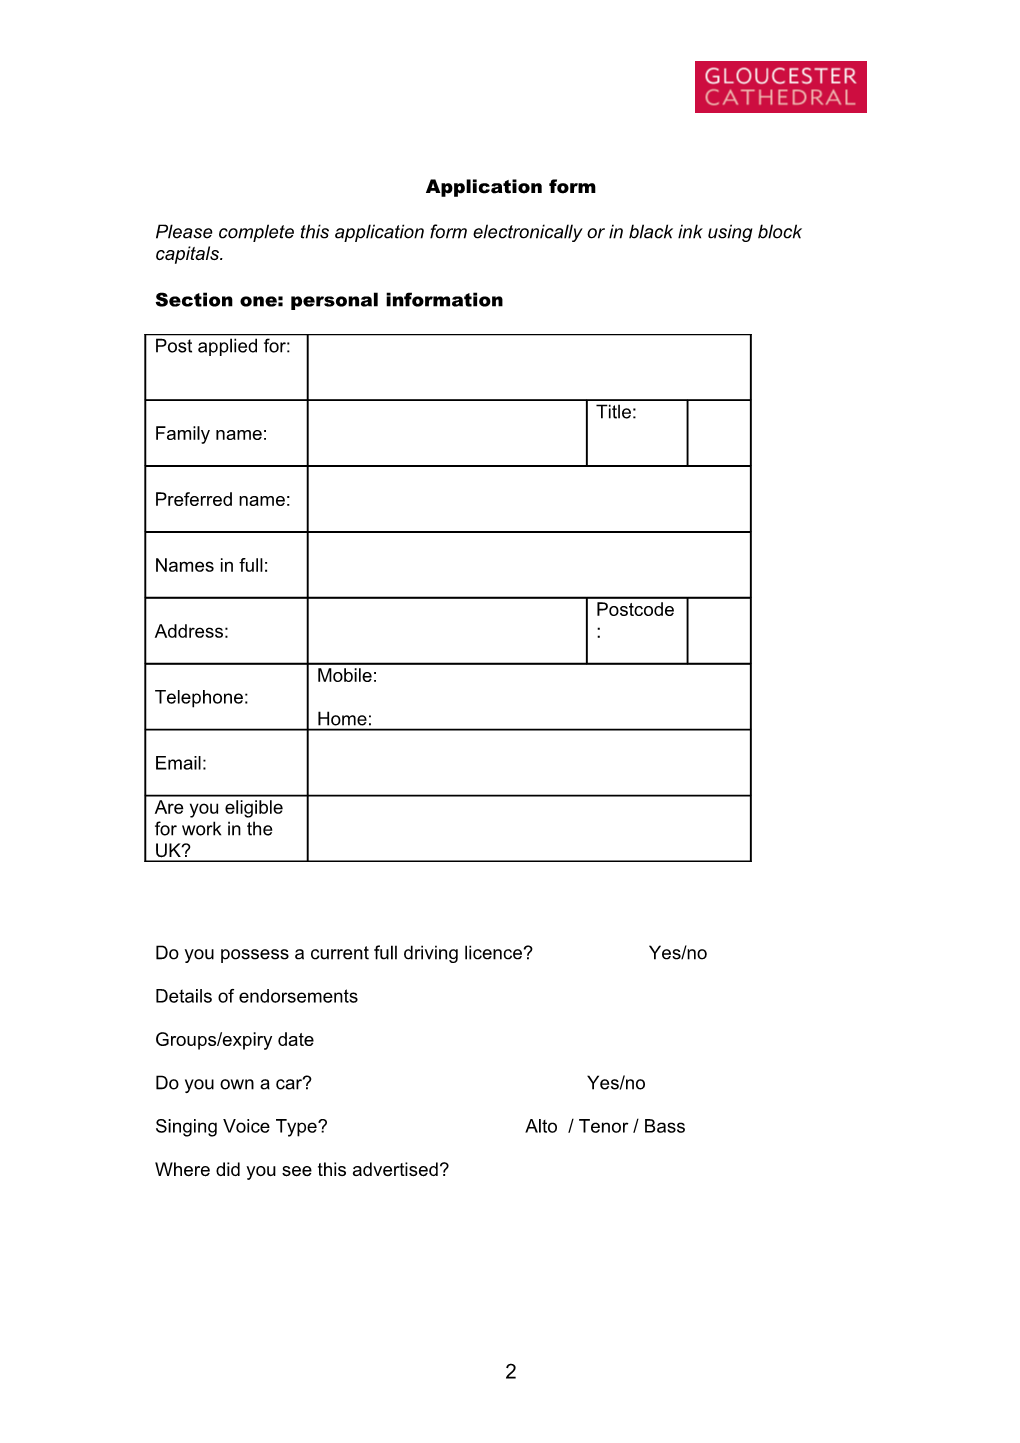 Please Complete This Application Form Electronically Or in Black Ink Using Block Capitals